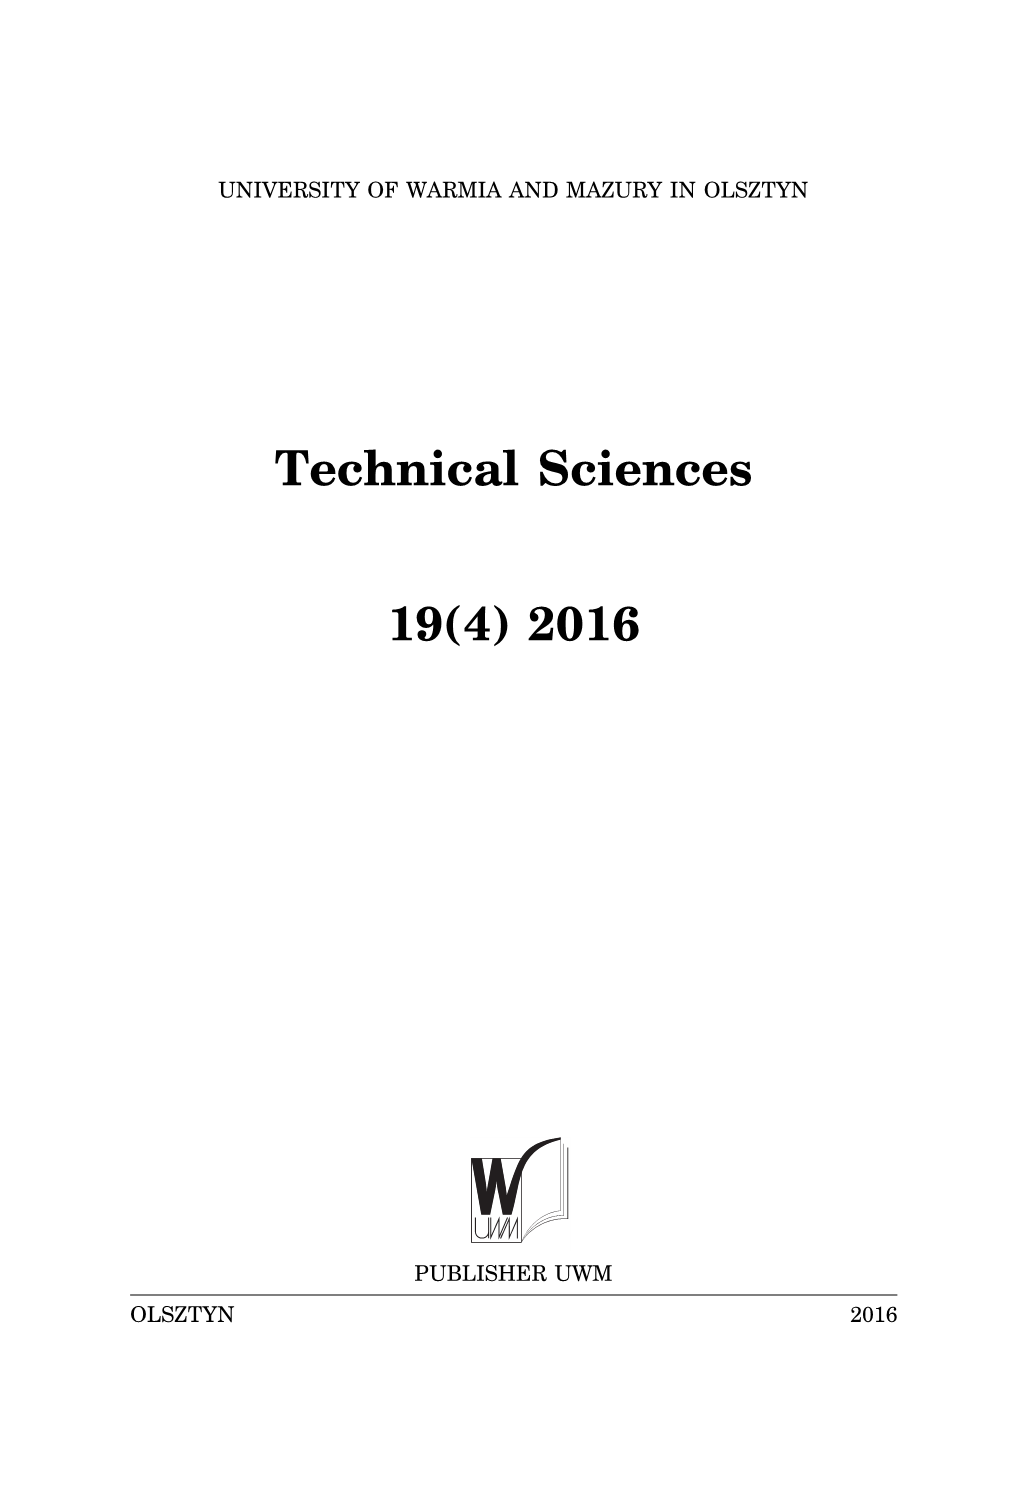 Technical Sciences 19(4) 2016 the Effect of Drying and Long-Term